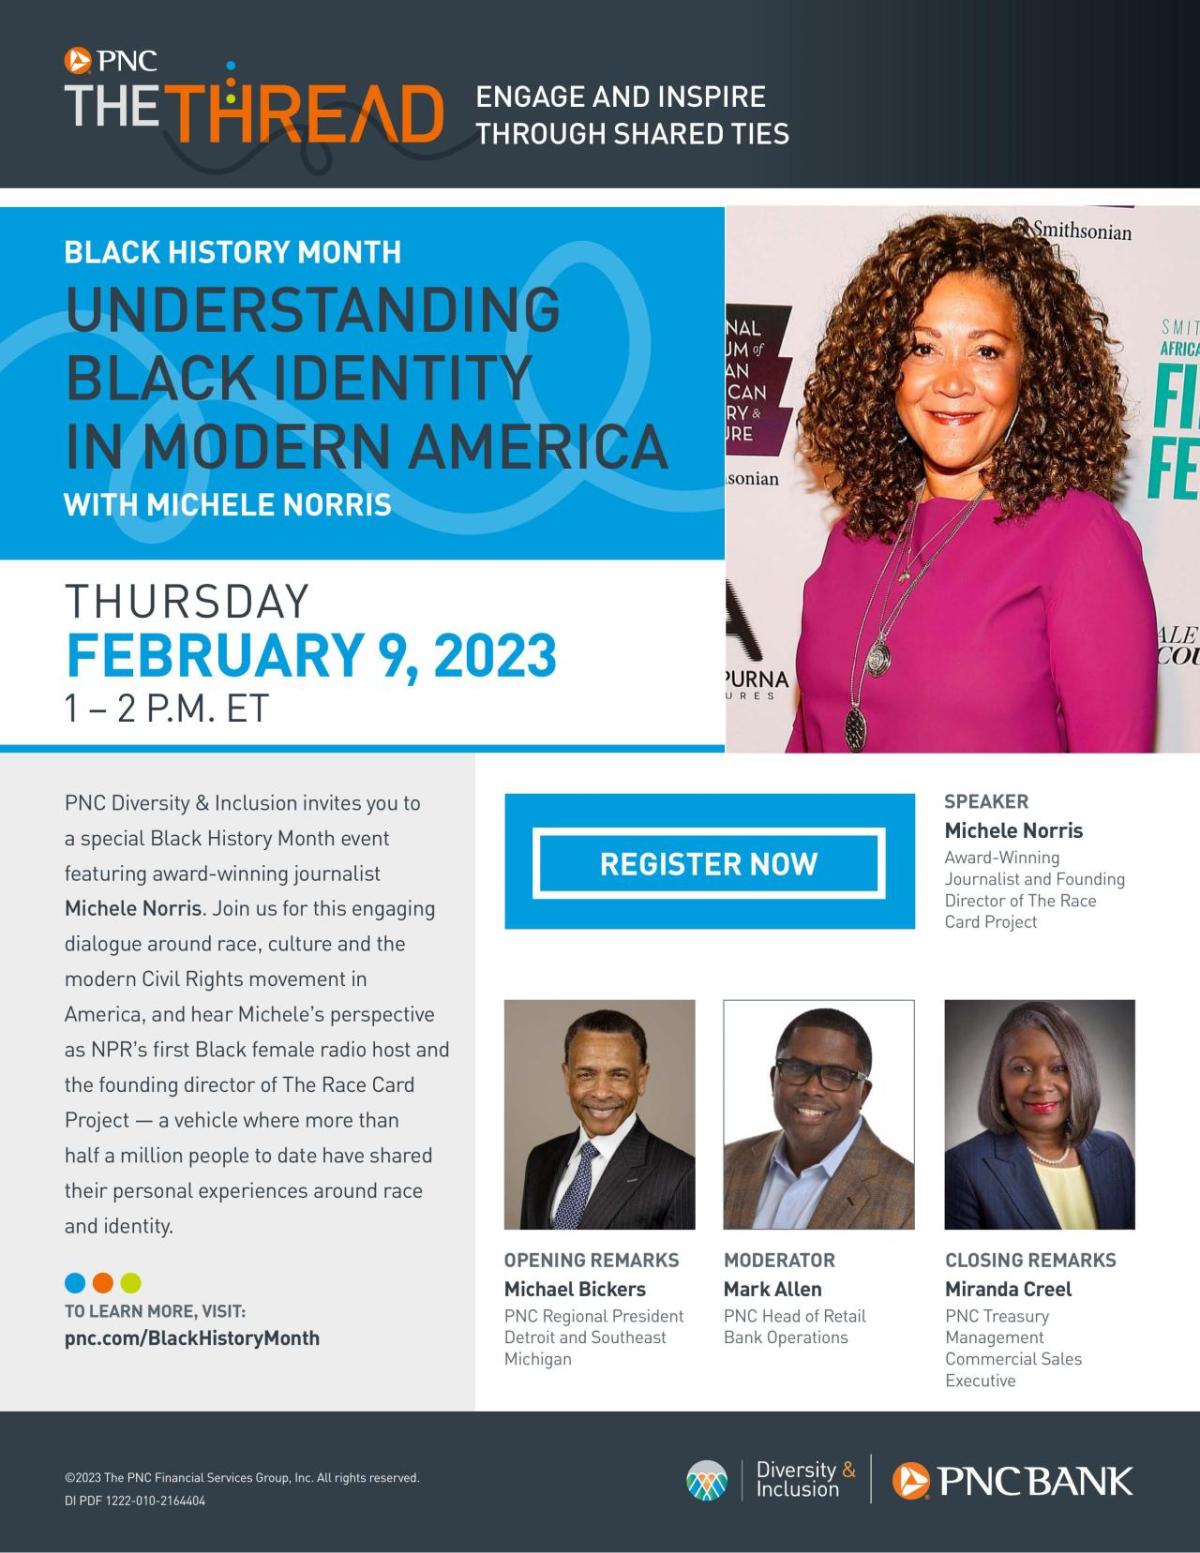 Flyer "PNC The Thread. Engage and Inspire through shared threads. BLACK HISTORY MONTH UNDERSTANDING BLACK IDENTITY IN MODERN AMERICA WITH MICHELE NORRIS. THURSDAY FEBRUARY 9, 2023 1 – 2 P.M. ET. PNC Diversity & Inclusion invites you to a special Black History Month event featuring award-winning journalist Michele Norris. Join us for this engaging dialogue around race, culture and the modern Civil Rights movement in America, and hear Michele’s perspective as NPR’s first Black female radio host and the ..."